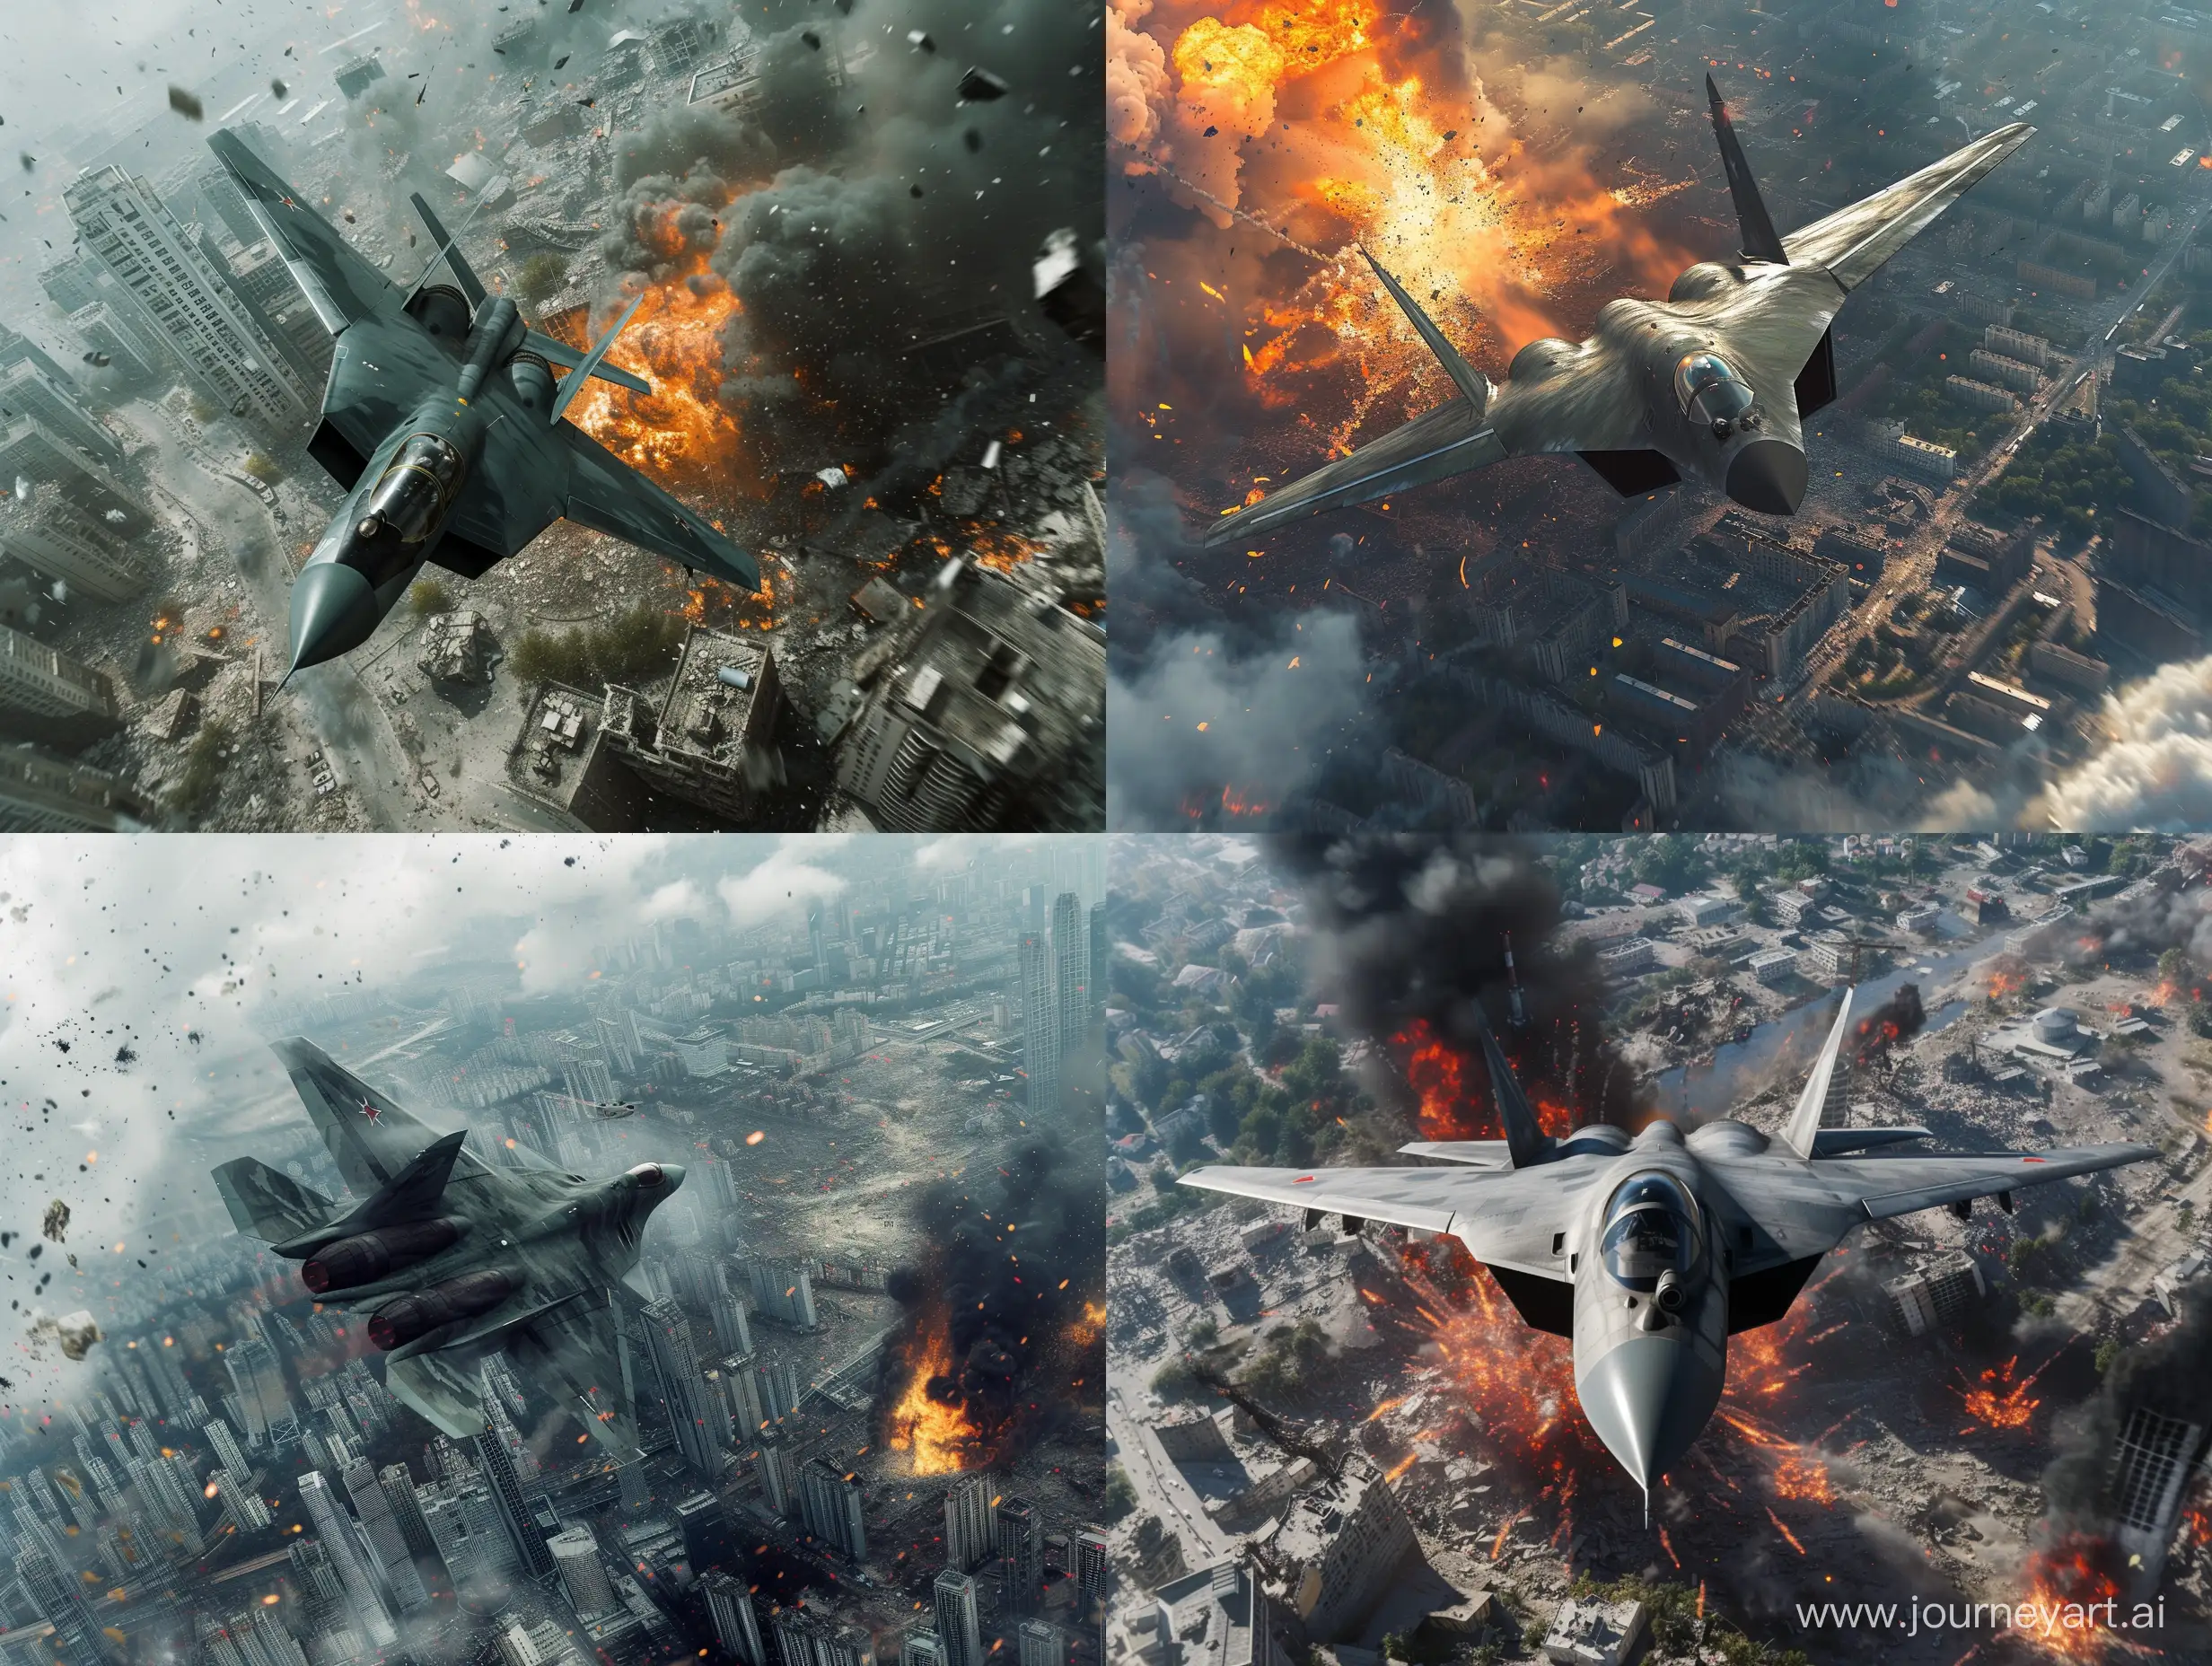 Su-57 flies over a destroyed city, building explosion, full view, drone view, landscape, cinematic